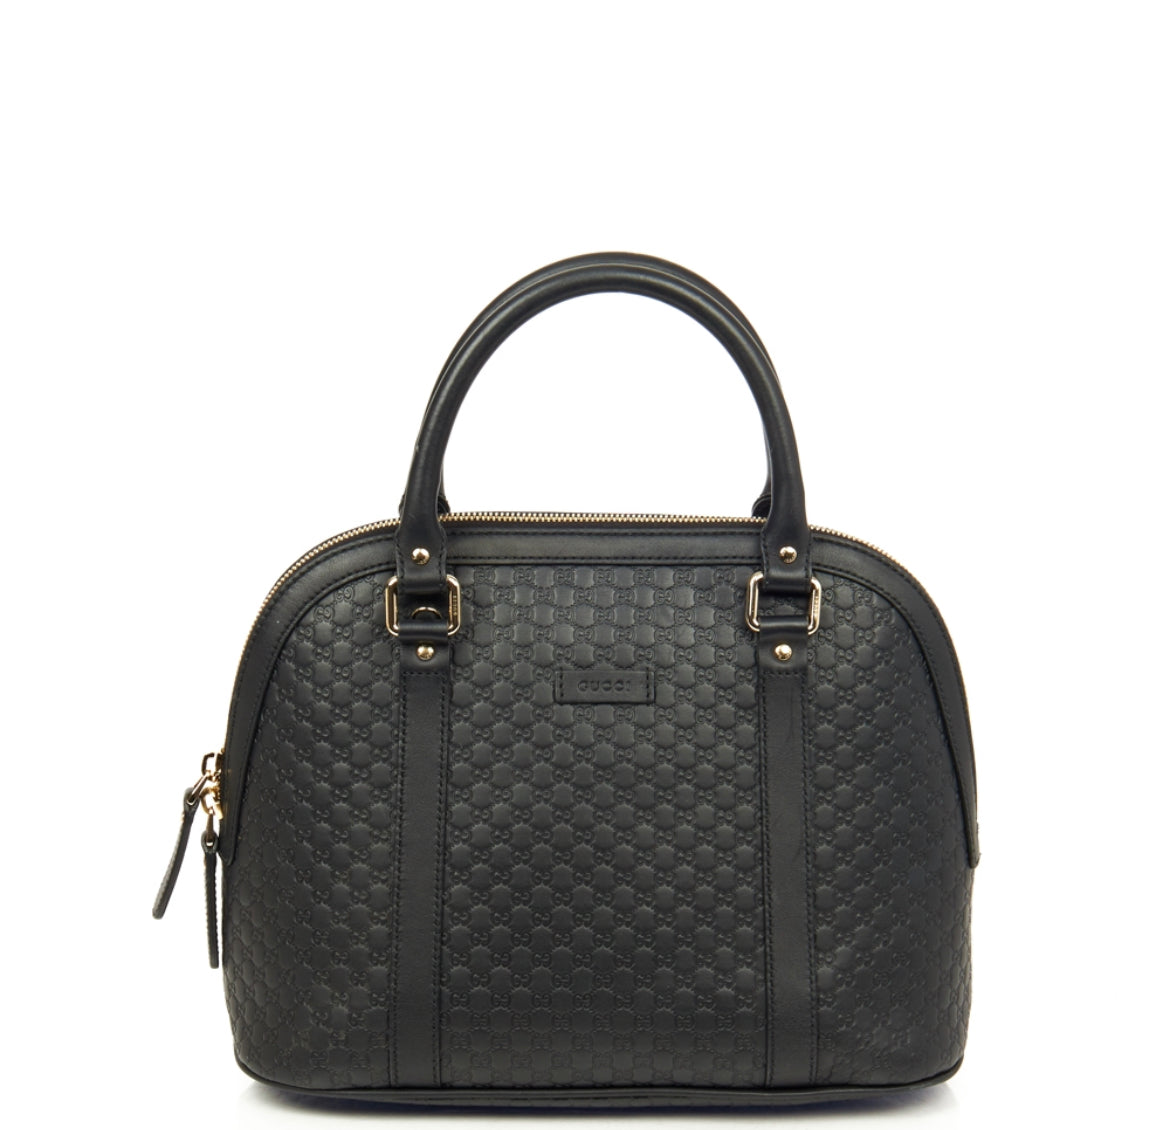 WOMENS GUCCI GG EMBOSSED GUCCISSIMA LEATHER BAG - BLACK